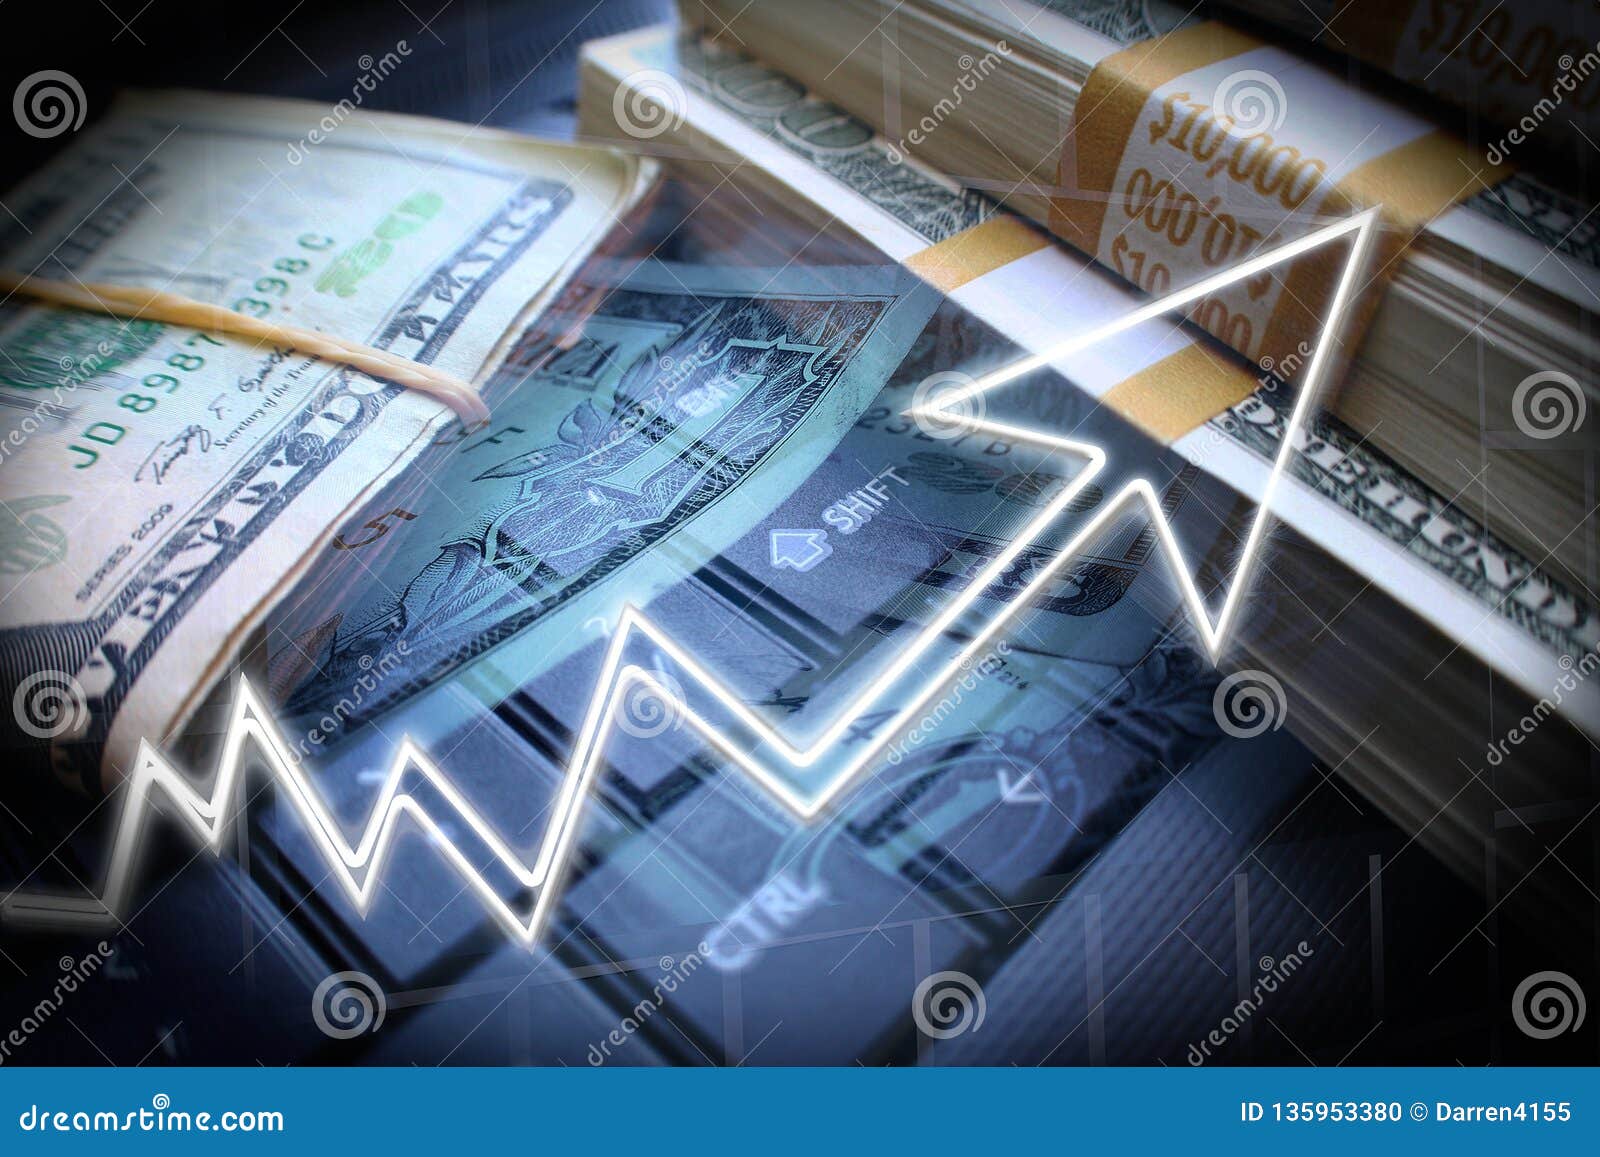 Making Online Money through Trading Stocks Stock Photo - Image of funds